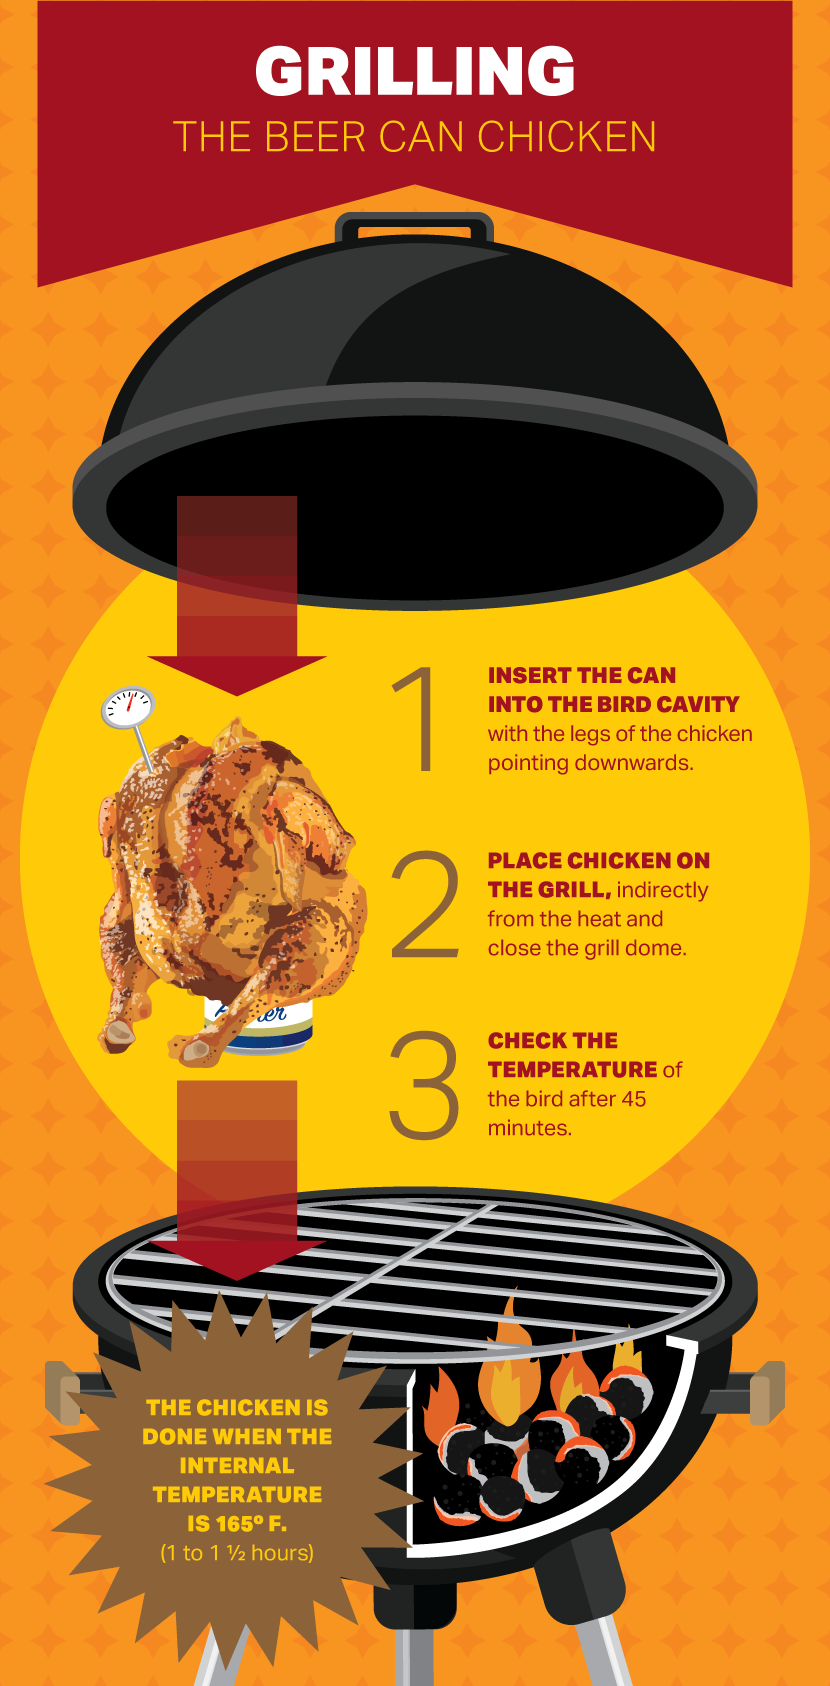 How To Grill A Beer-Can Chicken